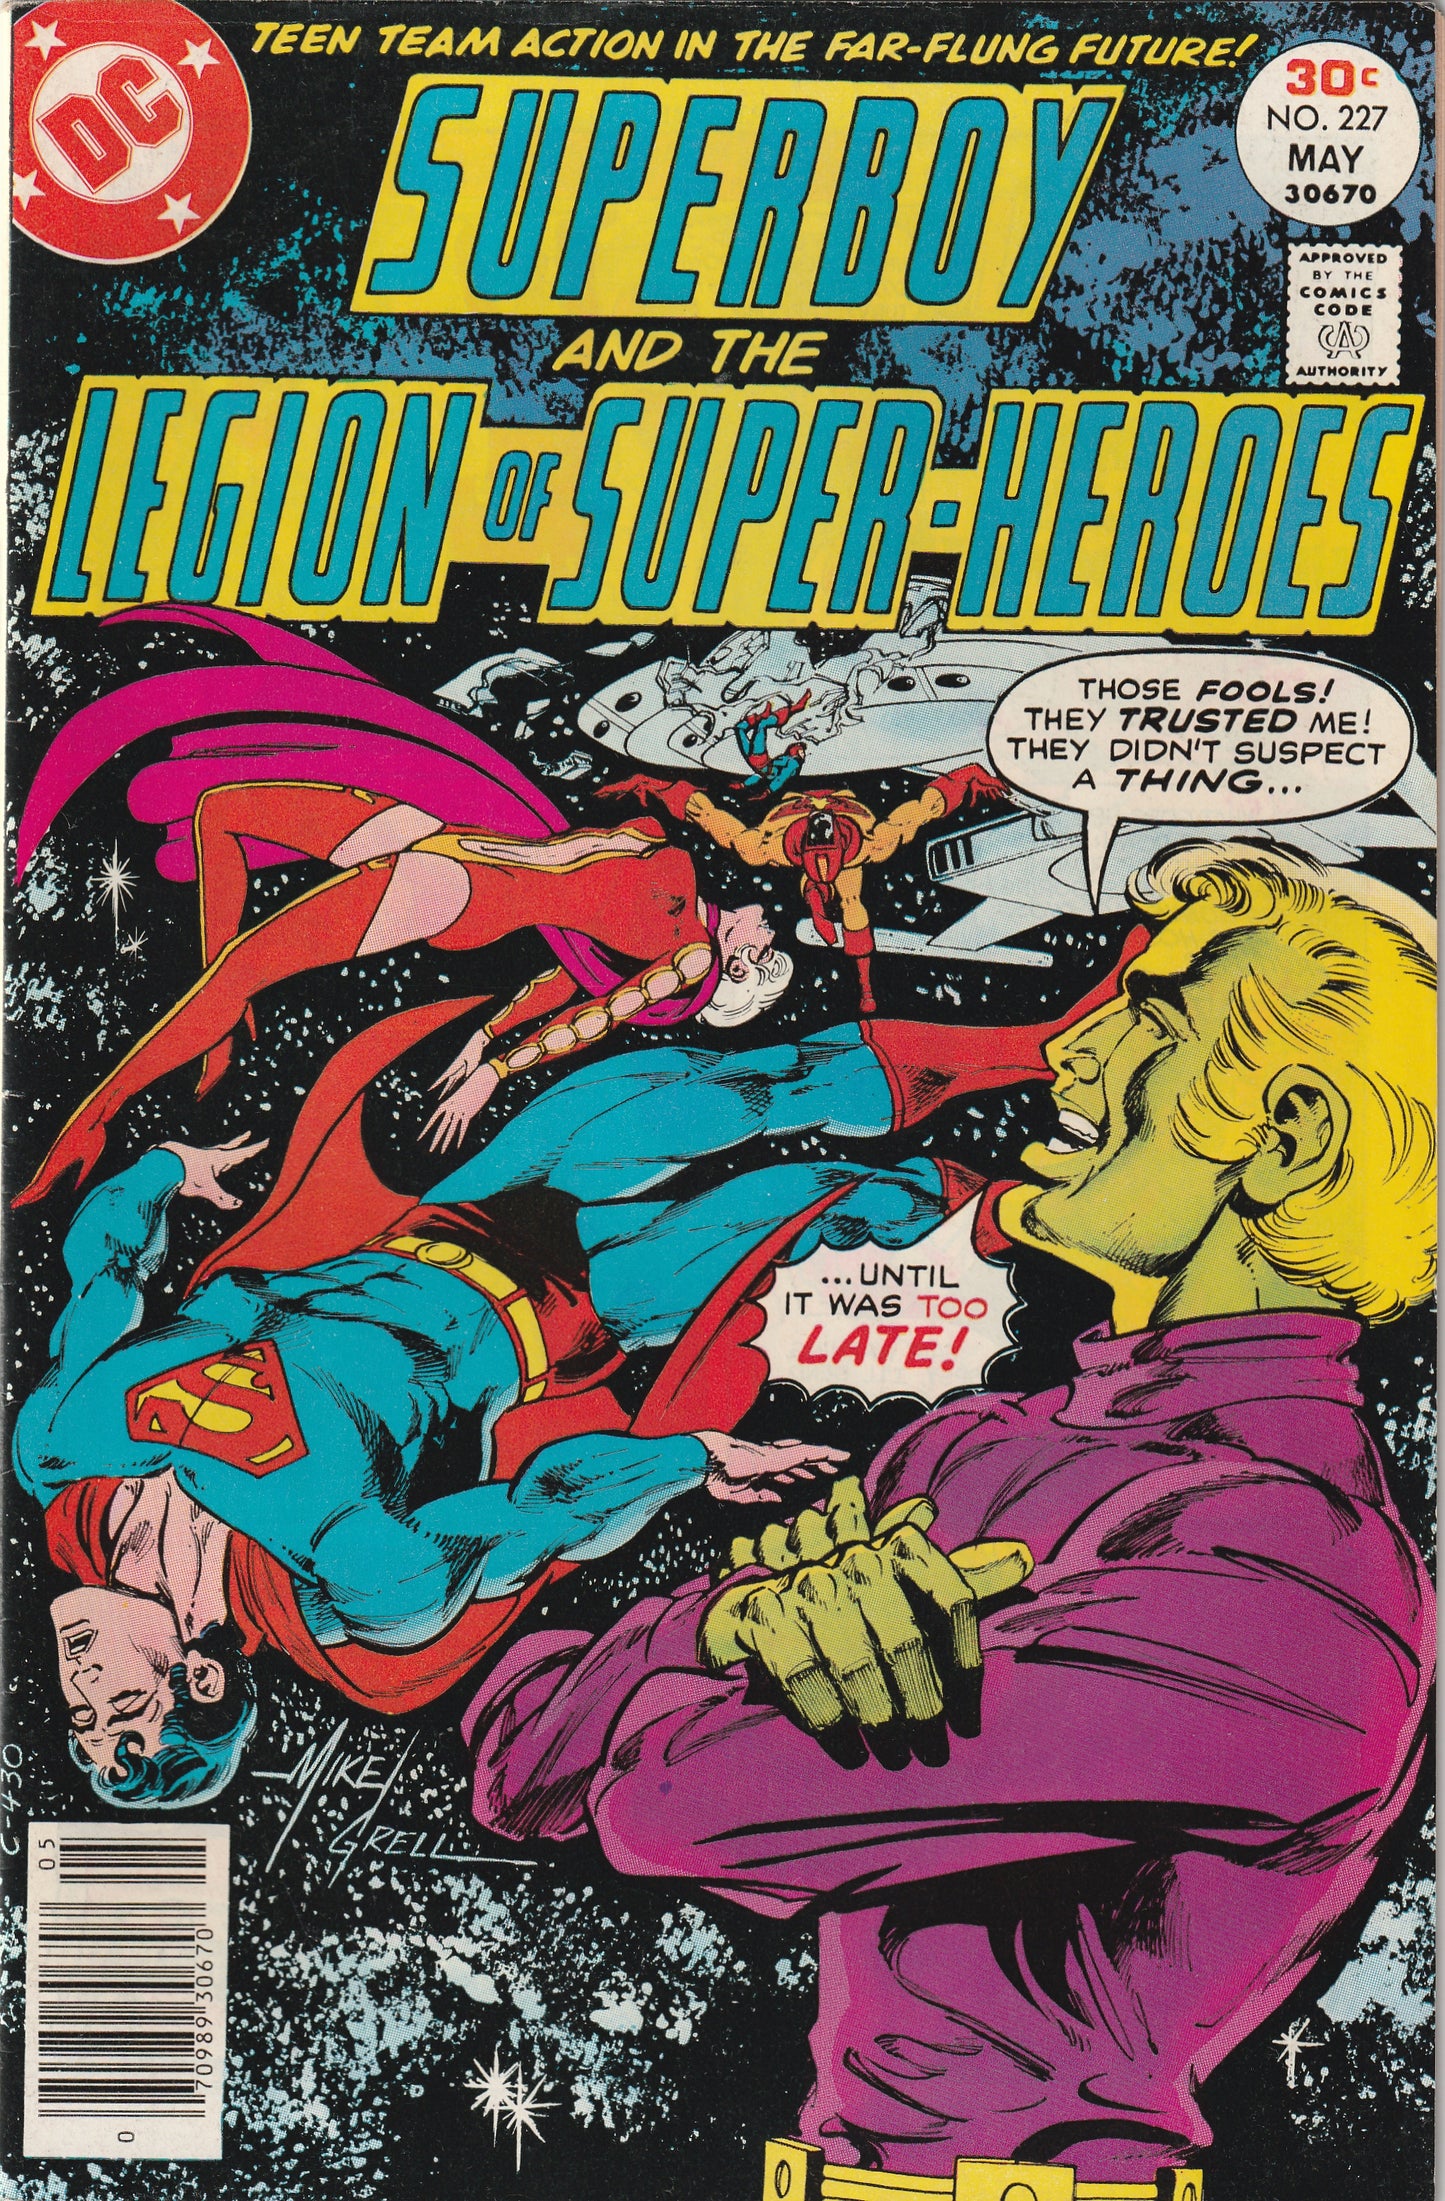 Superboy #227 (1977) - Starring the Legion of Super-Heroes